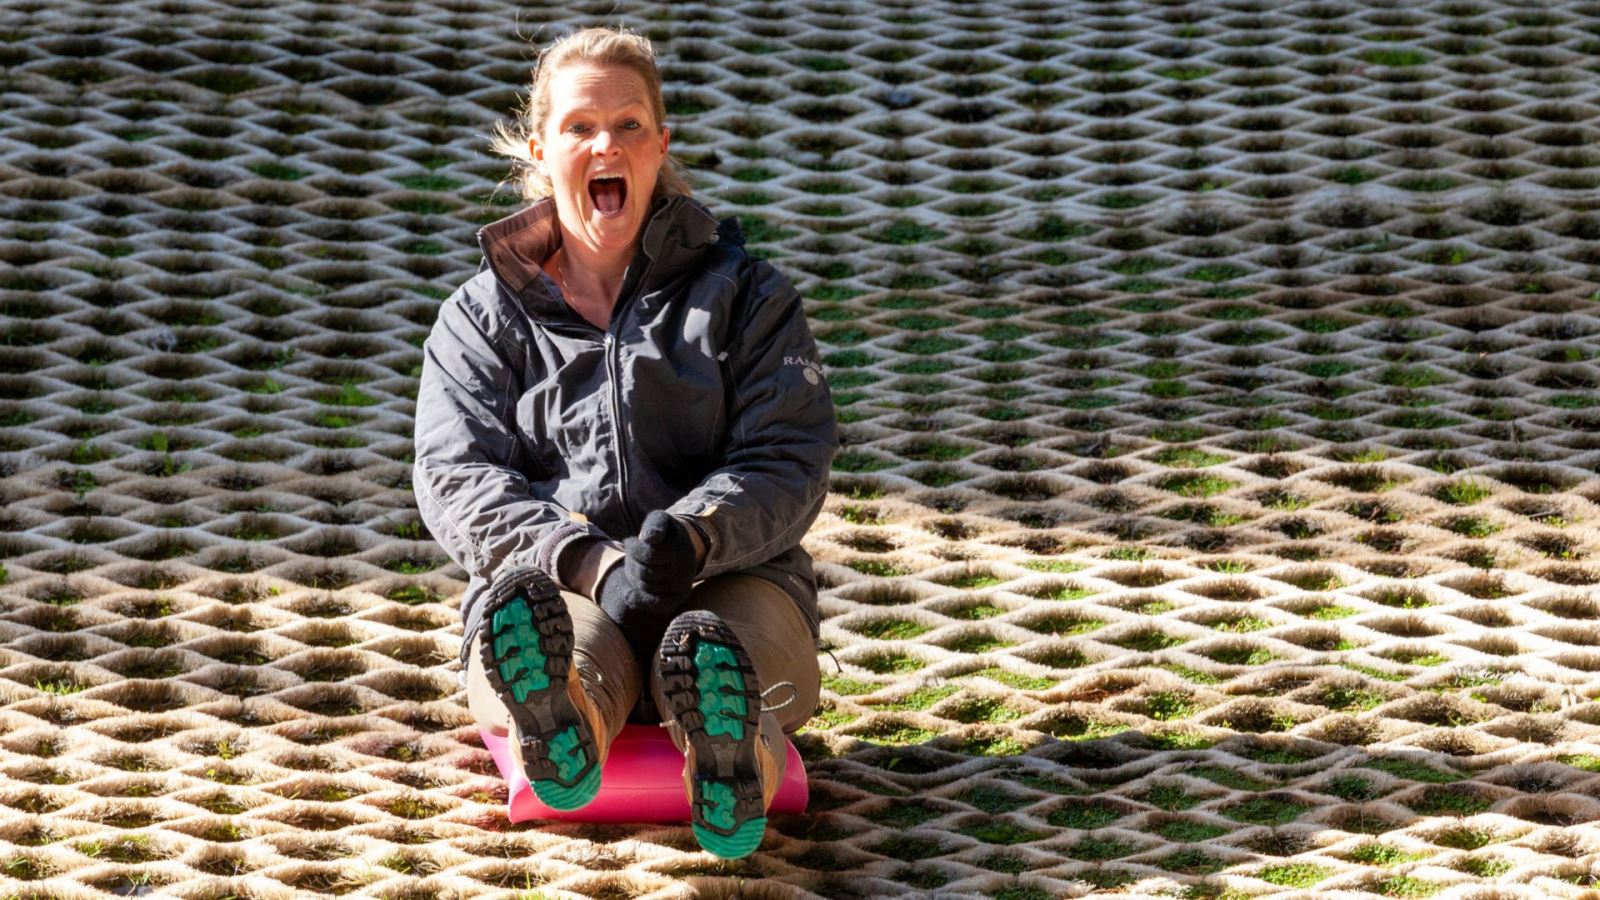 A woman having fun on a sledge at the dry ski slope